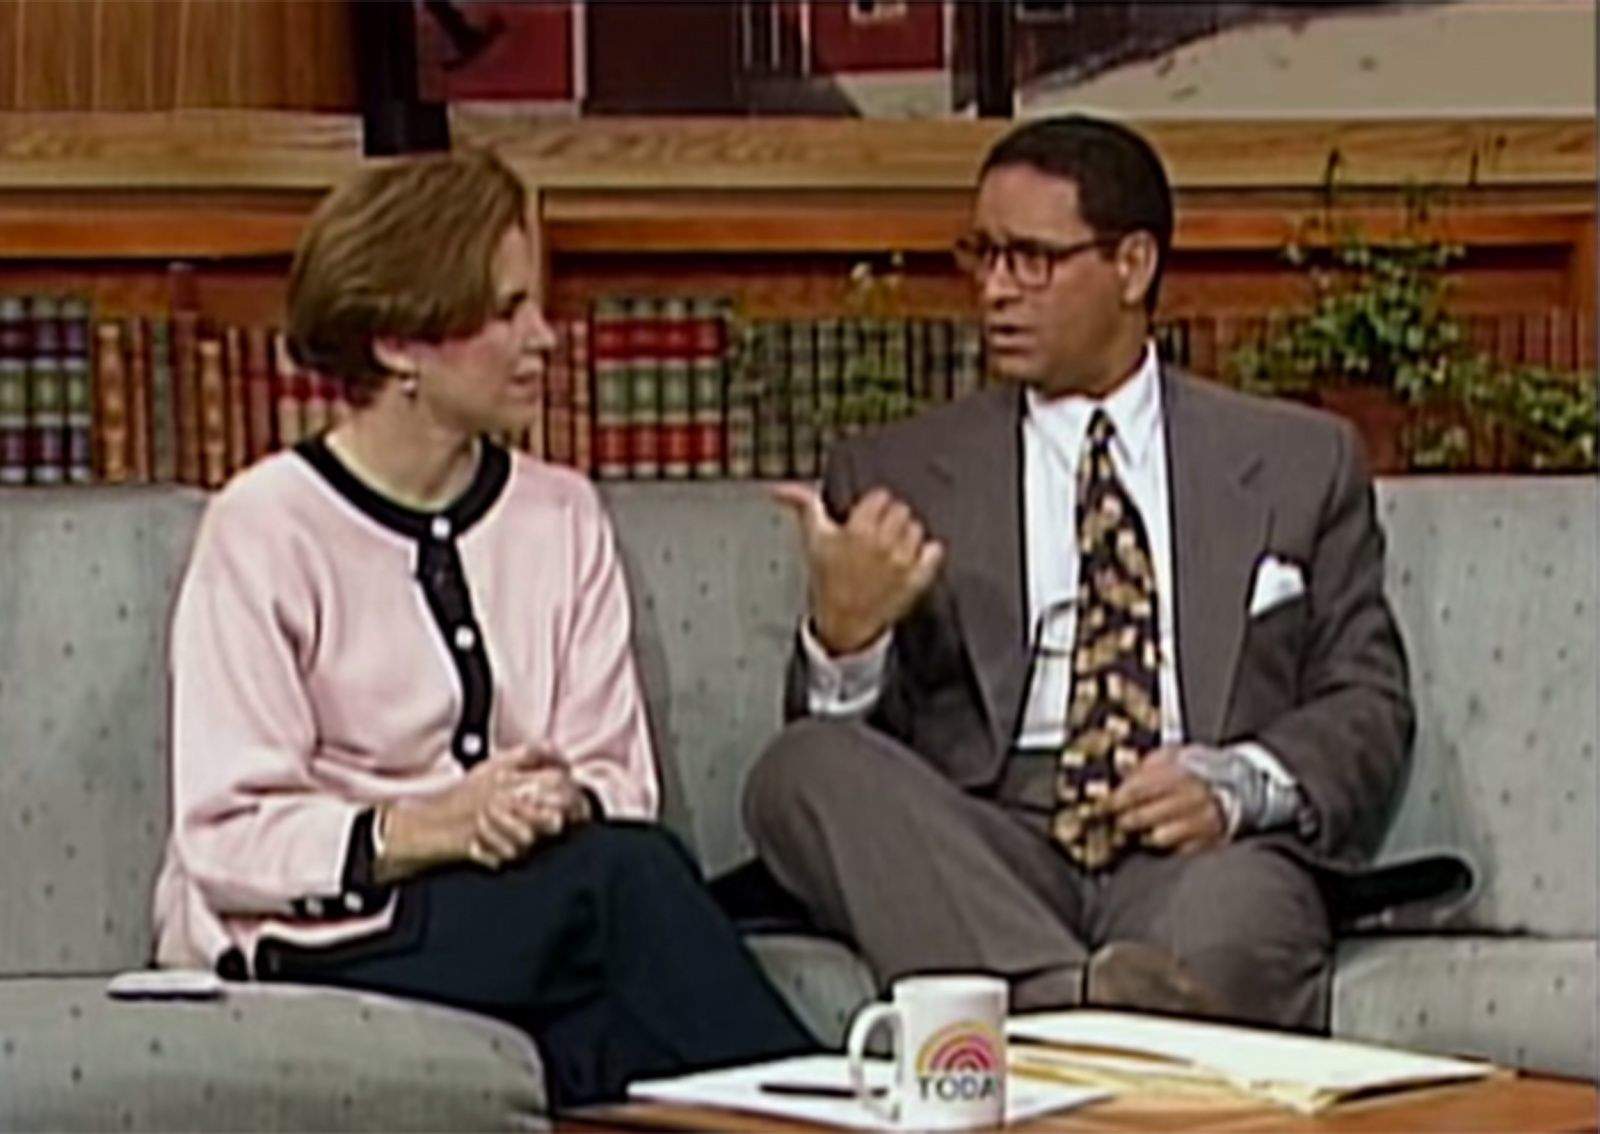 Today Show hosts Katie Couric and Bryan Gumbel try to understand the Internet during a 1994 segment. Photo: Today Show/YouTube